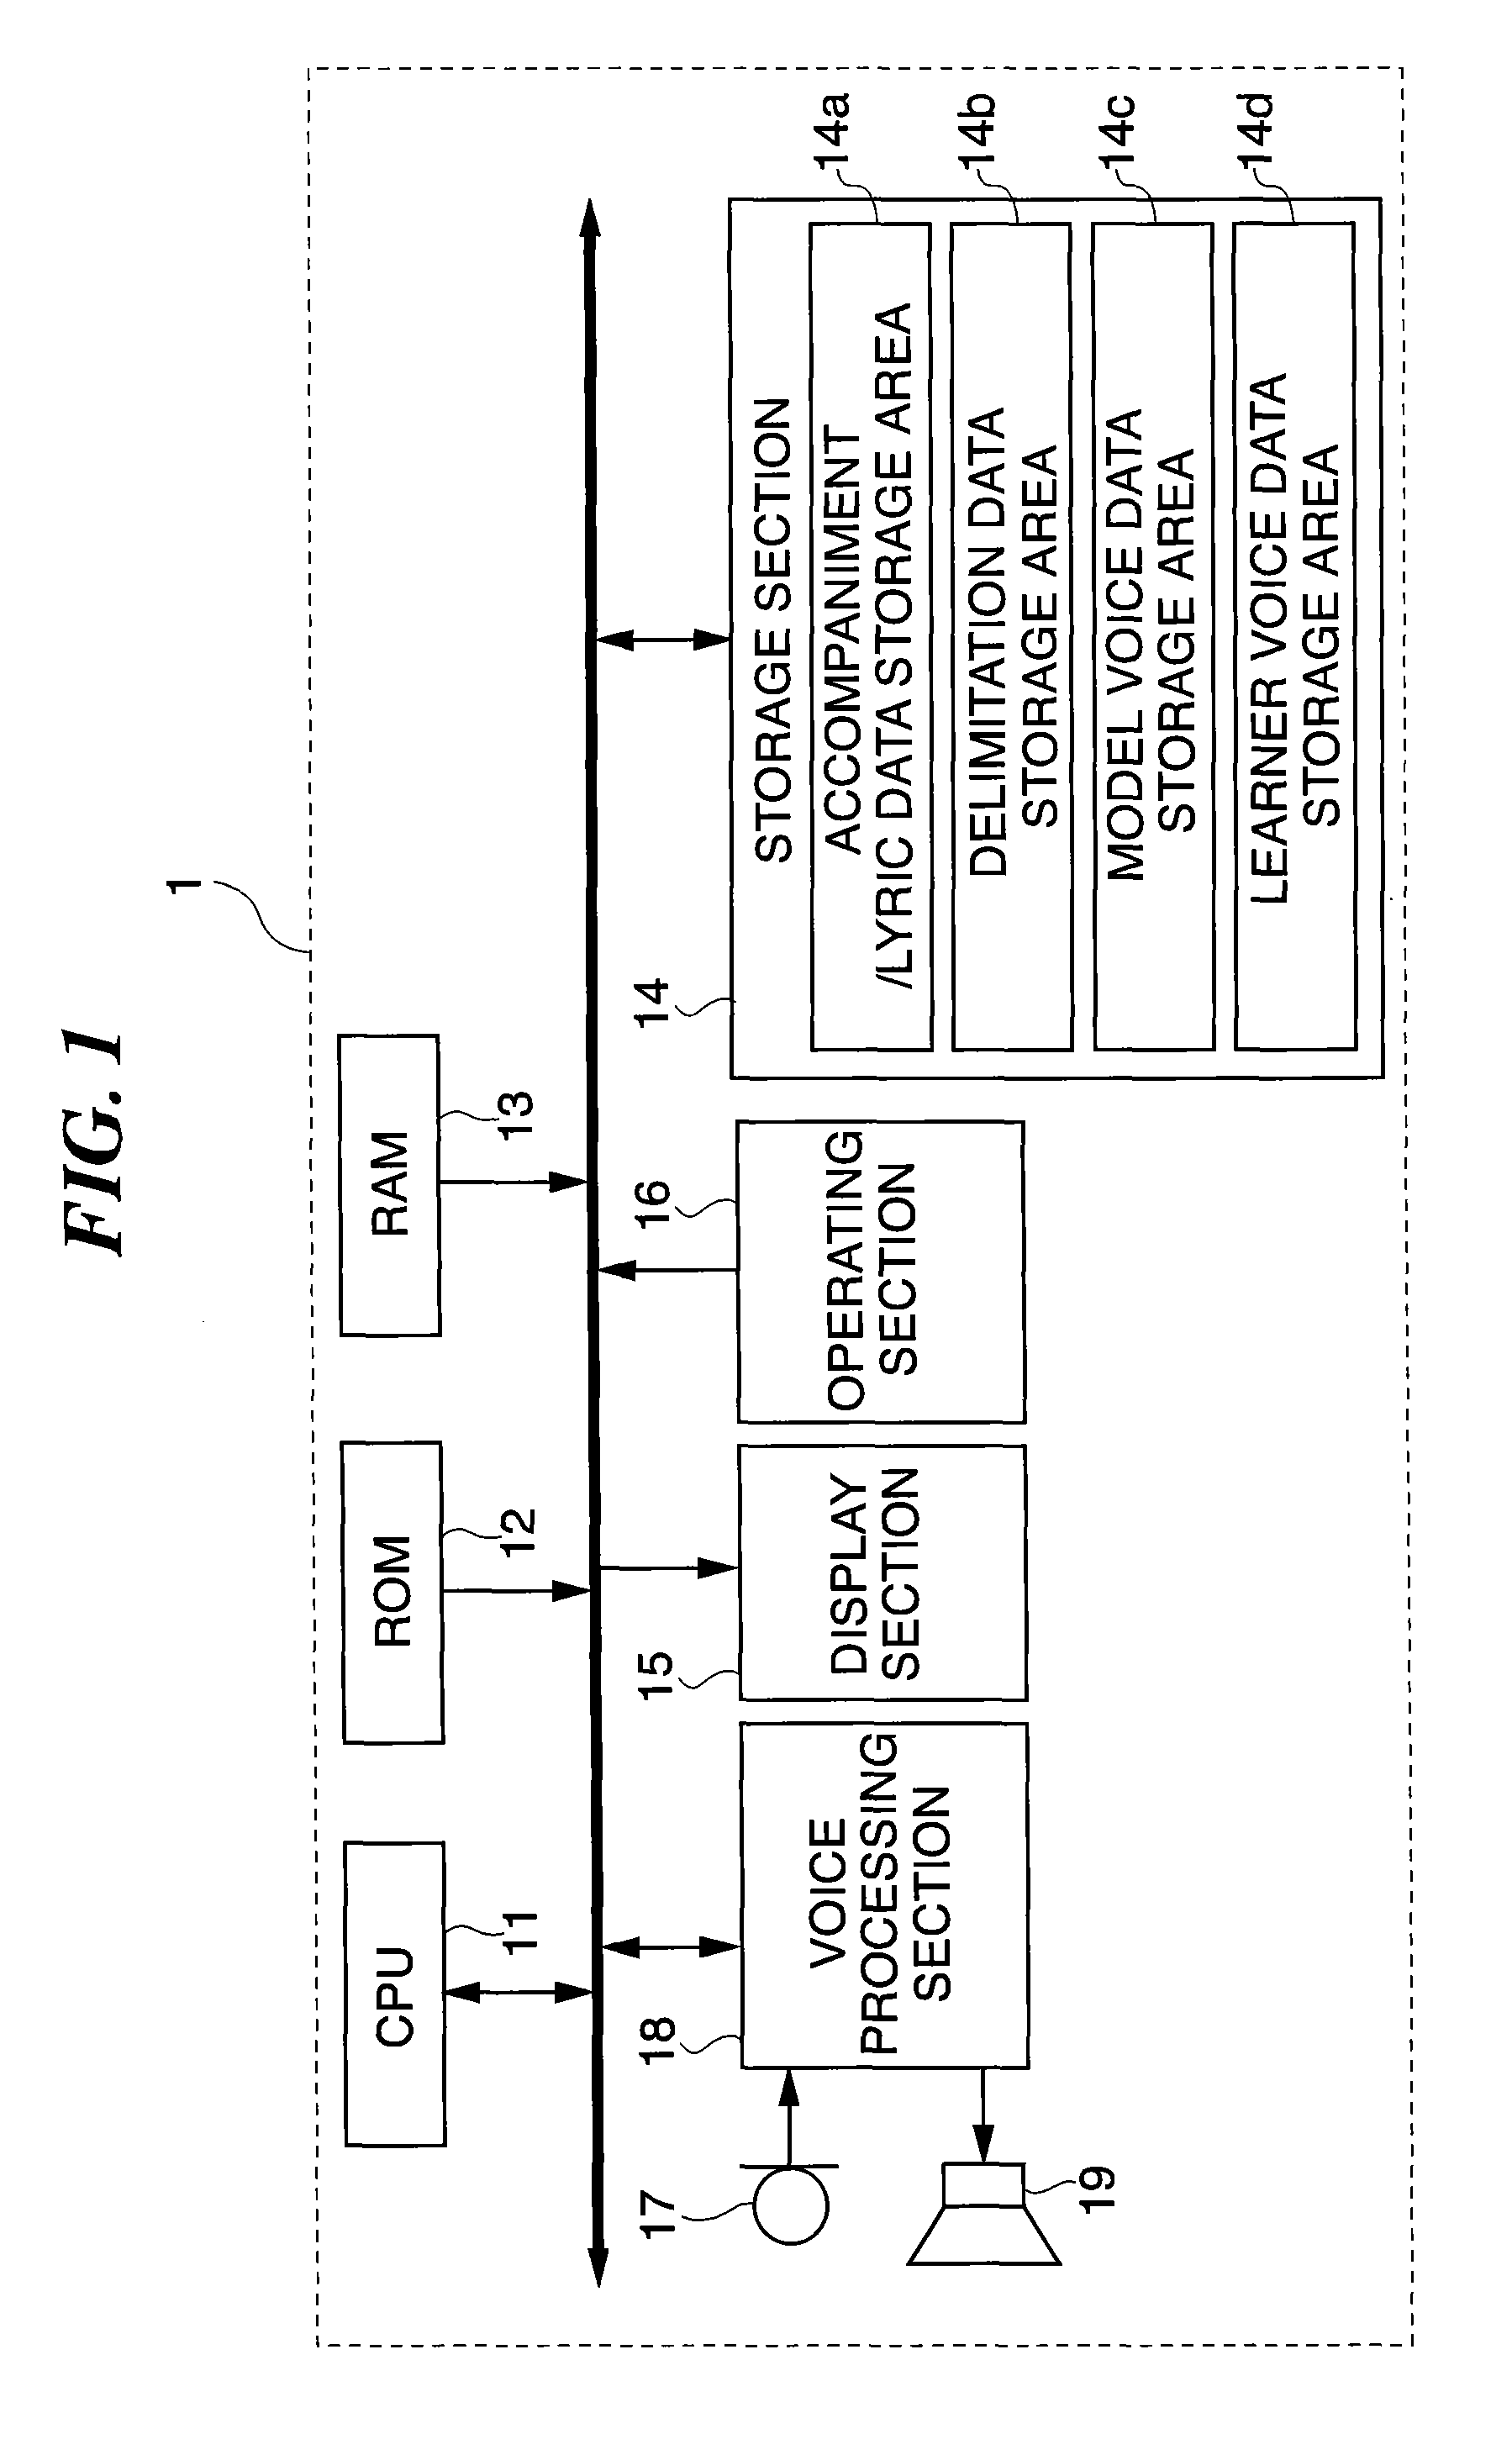 Song practice support device